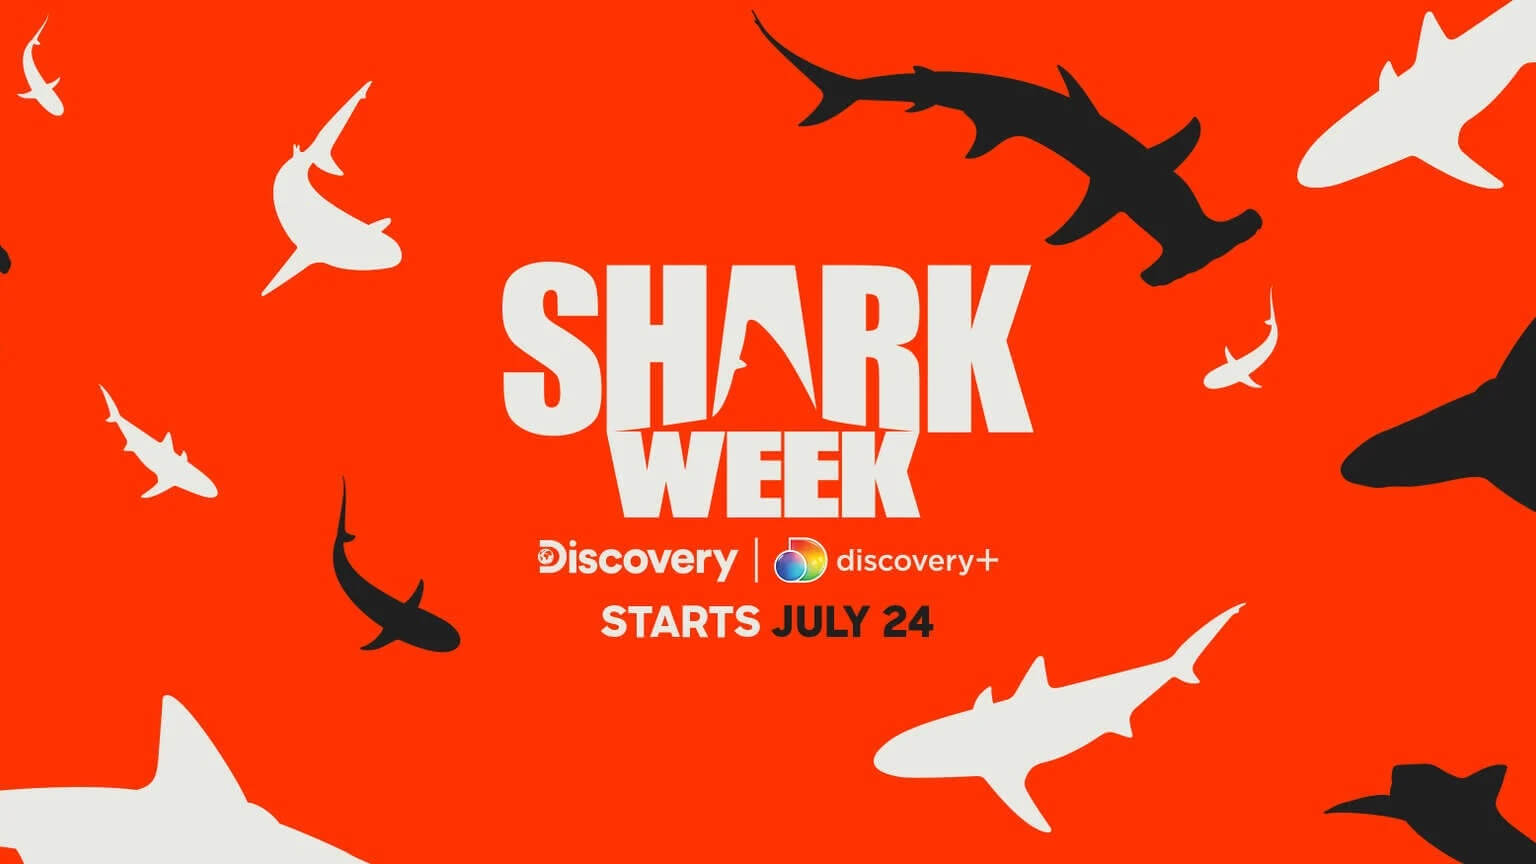 How To Watch Shark Week Without Cable